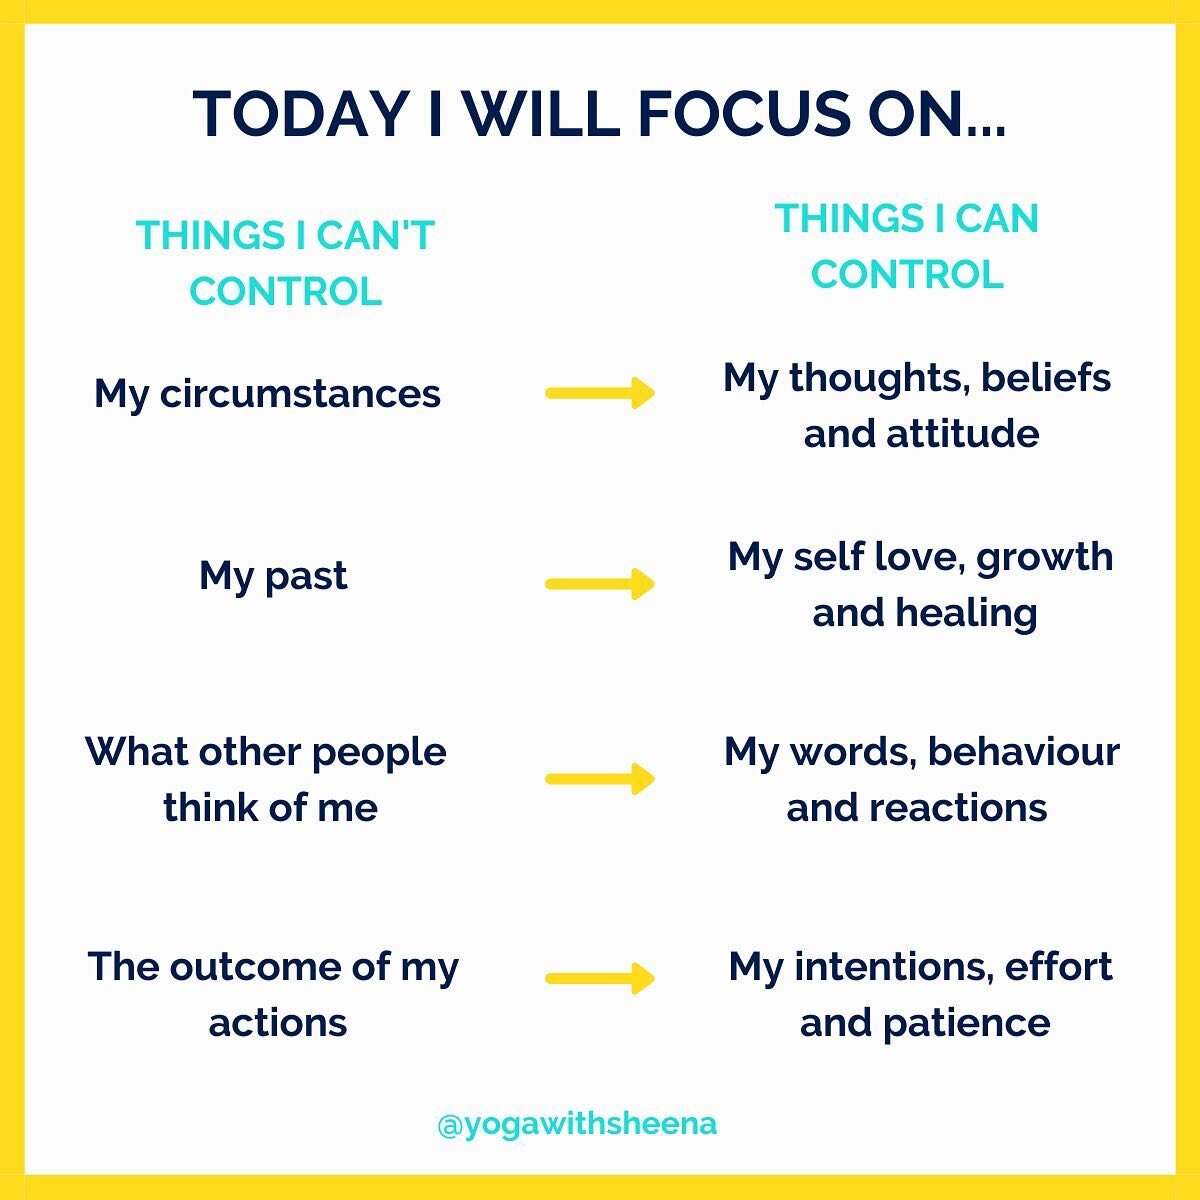 Your success lies in your ability to focus on what you CAN control, and not waste time and energy constantly thinking about what you can&rsquo;t

...it&rsquo;s as simple as that!!

Your mind is more powerful than anything else in your life. 

Let tha